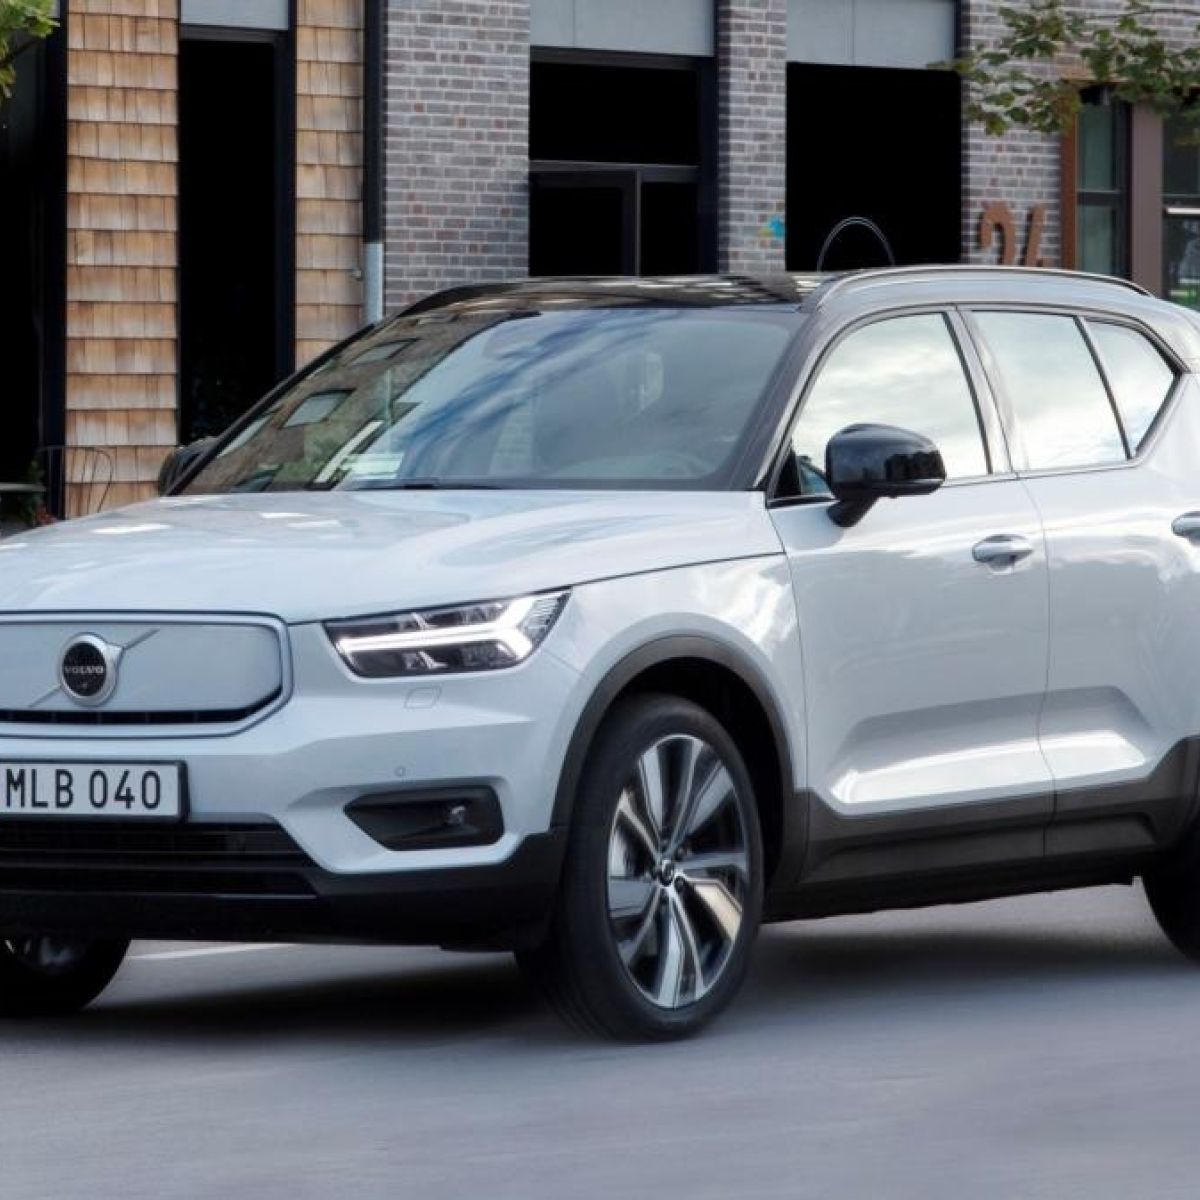 Volvo's all-electric model has been a long time coming. Is it worth the wait?